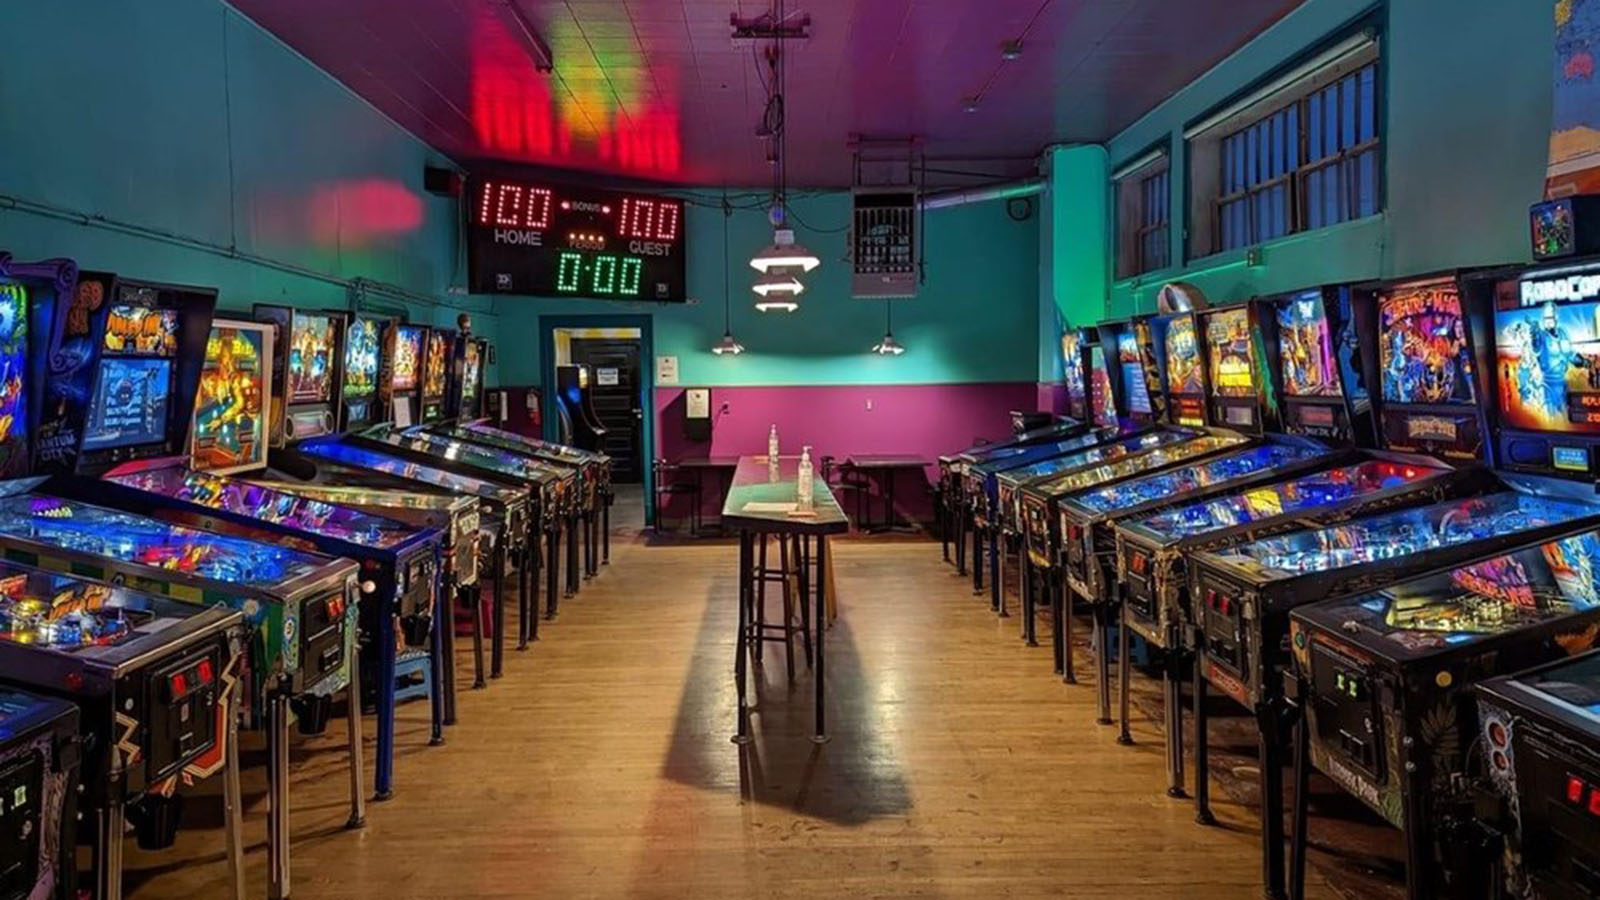 Hotels with arcades near me